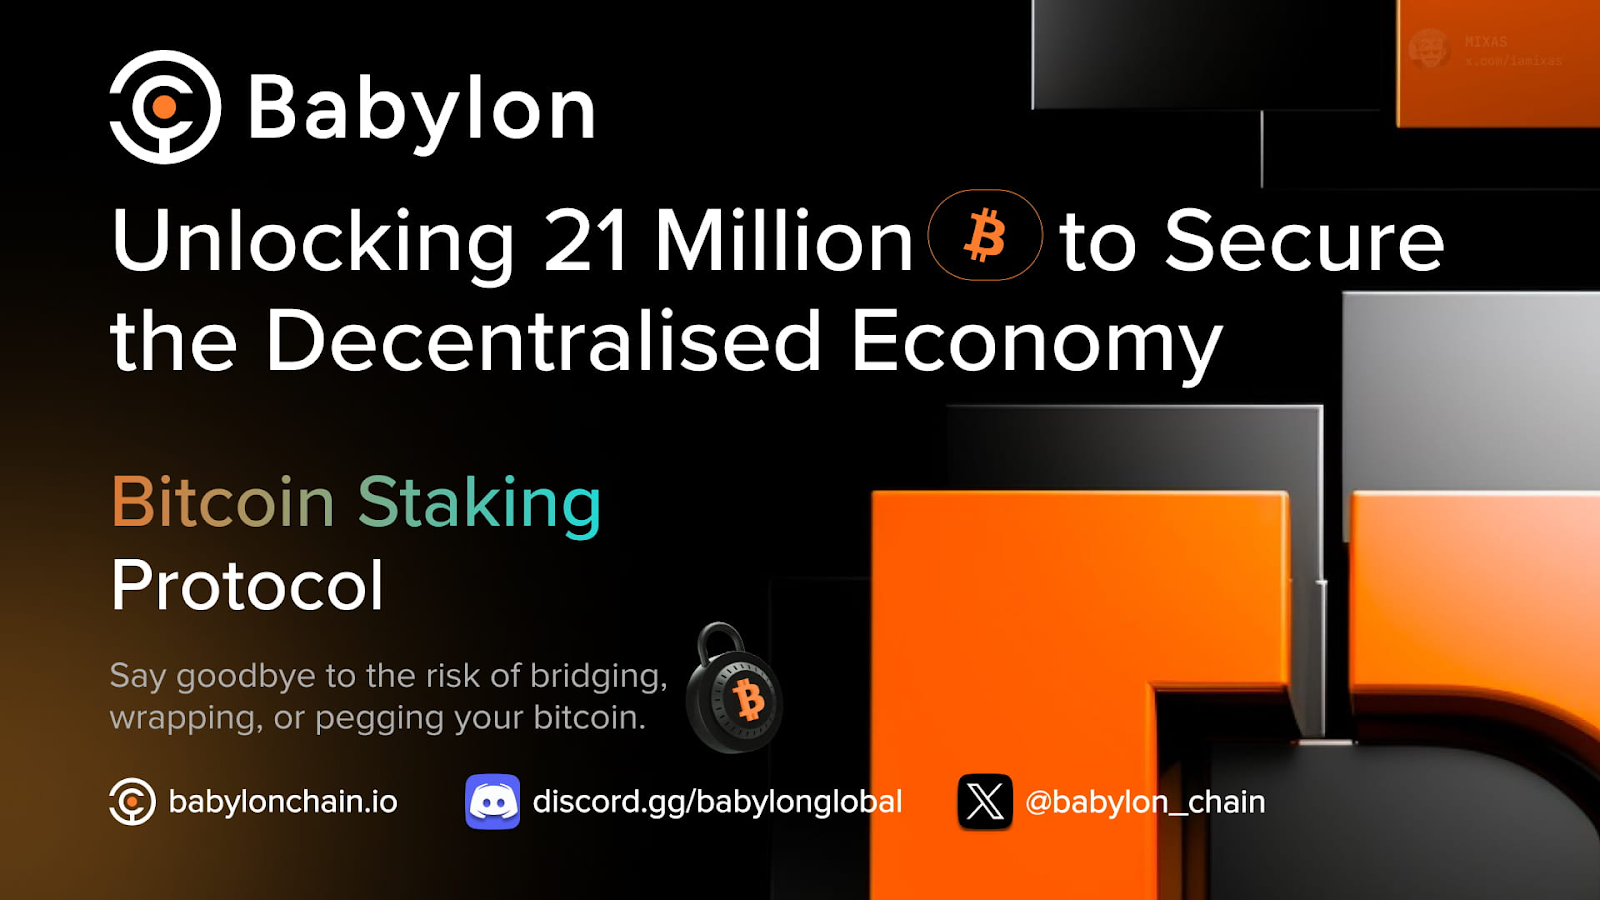 Babylon unlocks the ability to take any amount of Bitcoin on the Bitcoin network via a sovereign Cosmos chain, greatly expanding the utility and growing use cases of the Bitcoin blockchain moving forward. (Image Credit: Babylon Binance blog post via Babylon and Binance Square)